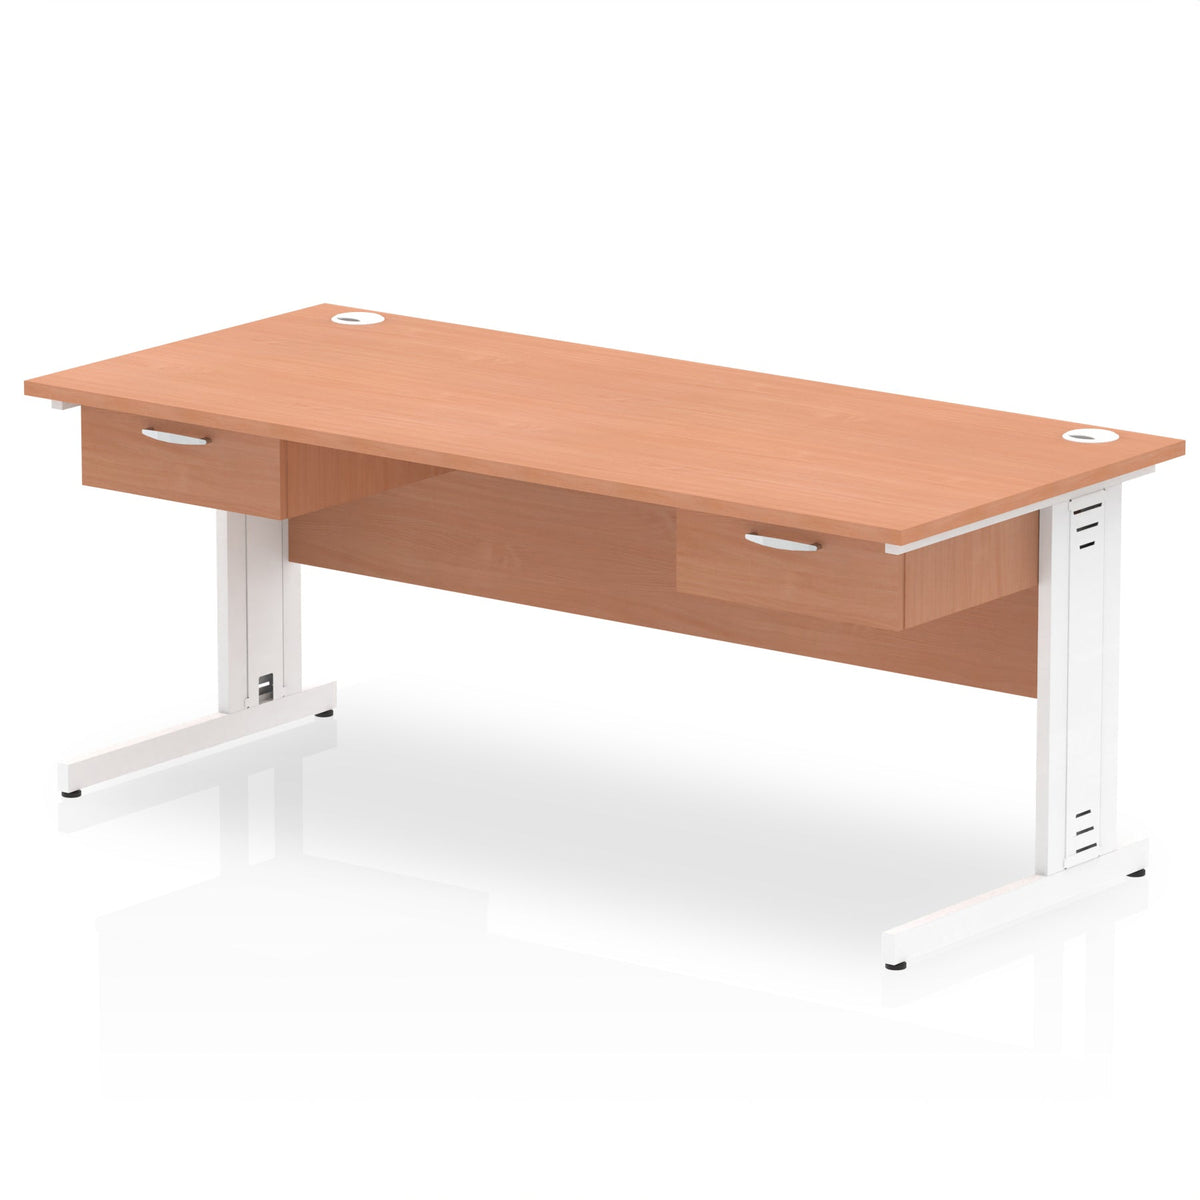 Impulse Cable Managed 1800mm Straight Desk White Frame With Two One Drawer Fixed Pedestals